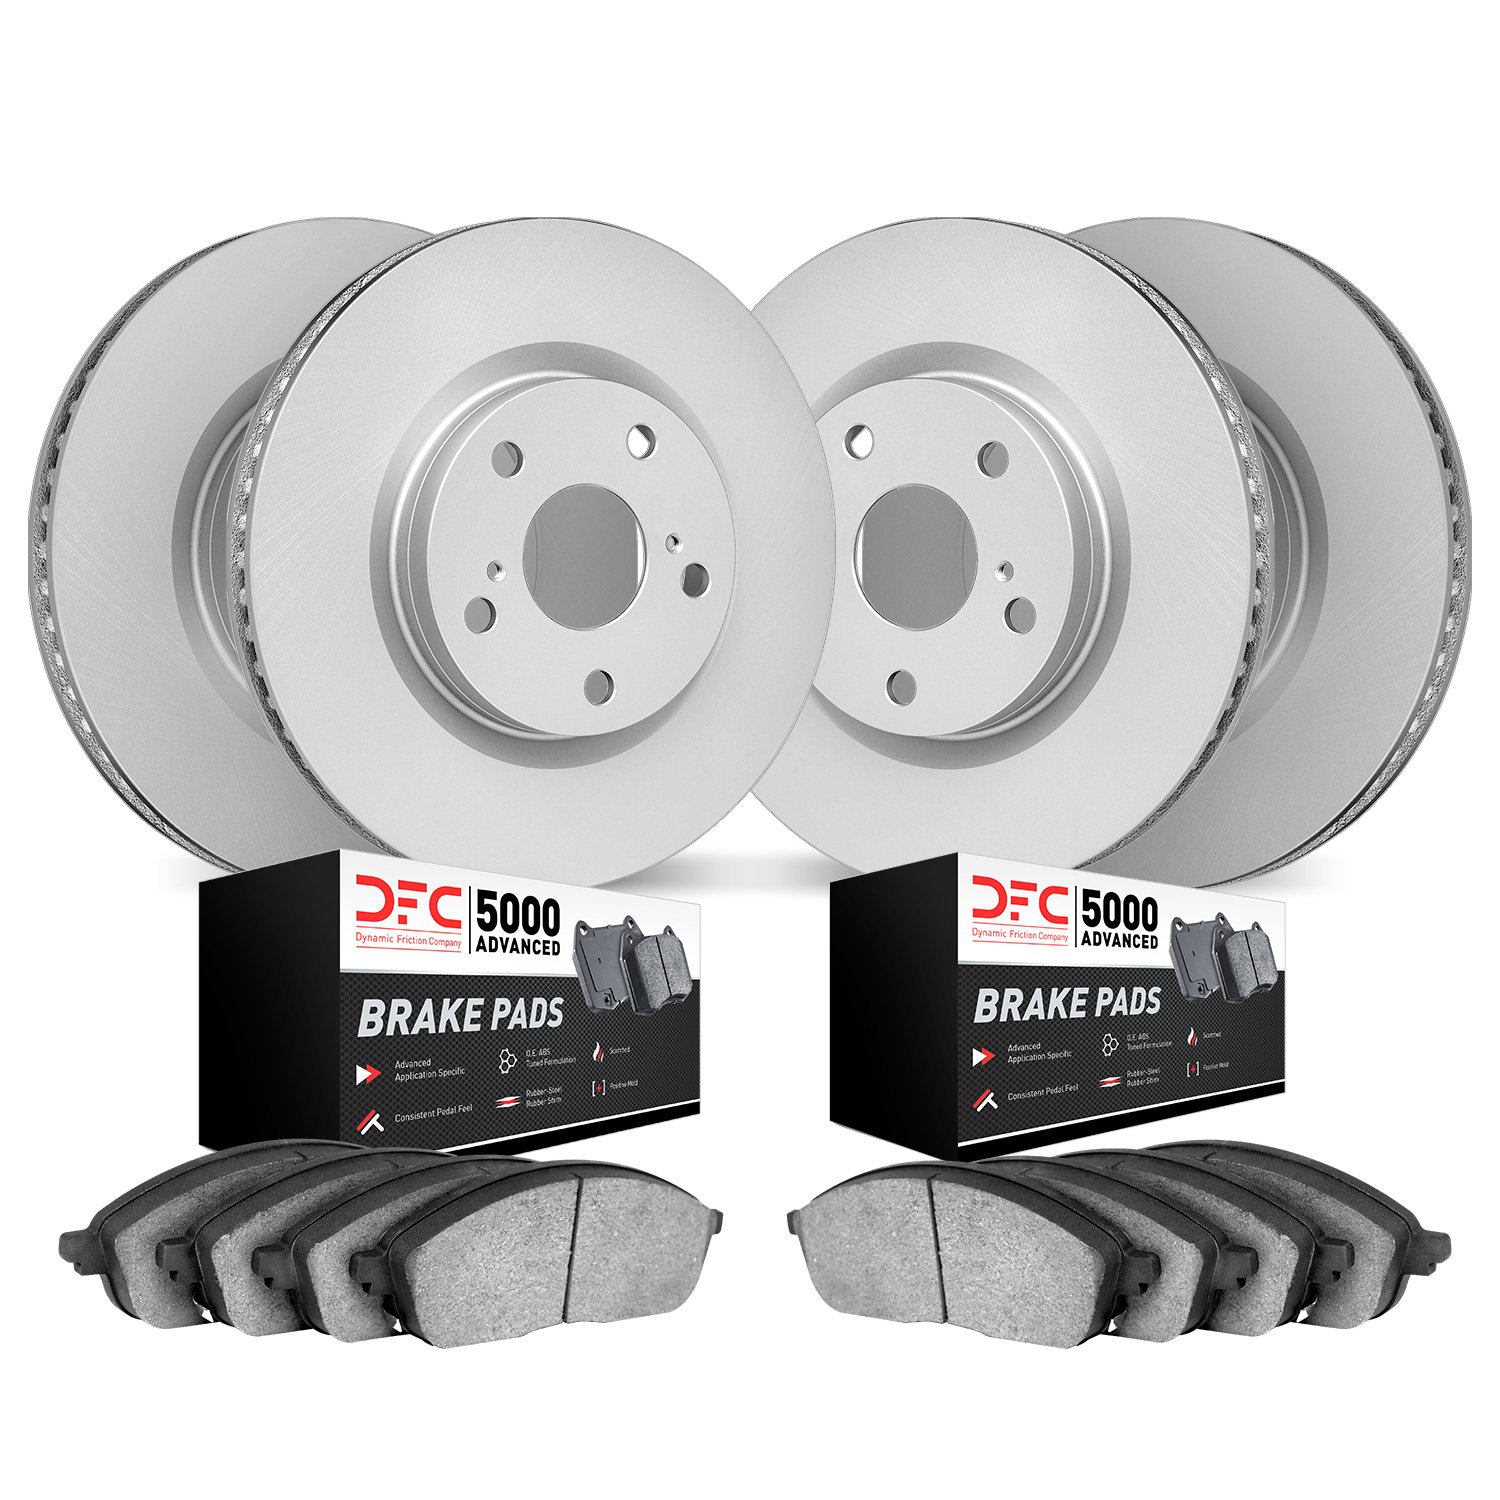 4504-47159 Geospec Brake Rotors w/5000 Advanced Brake Pads Kit, 2009-2015 GM, Position: Front and Rear